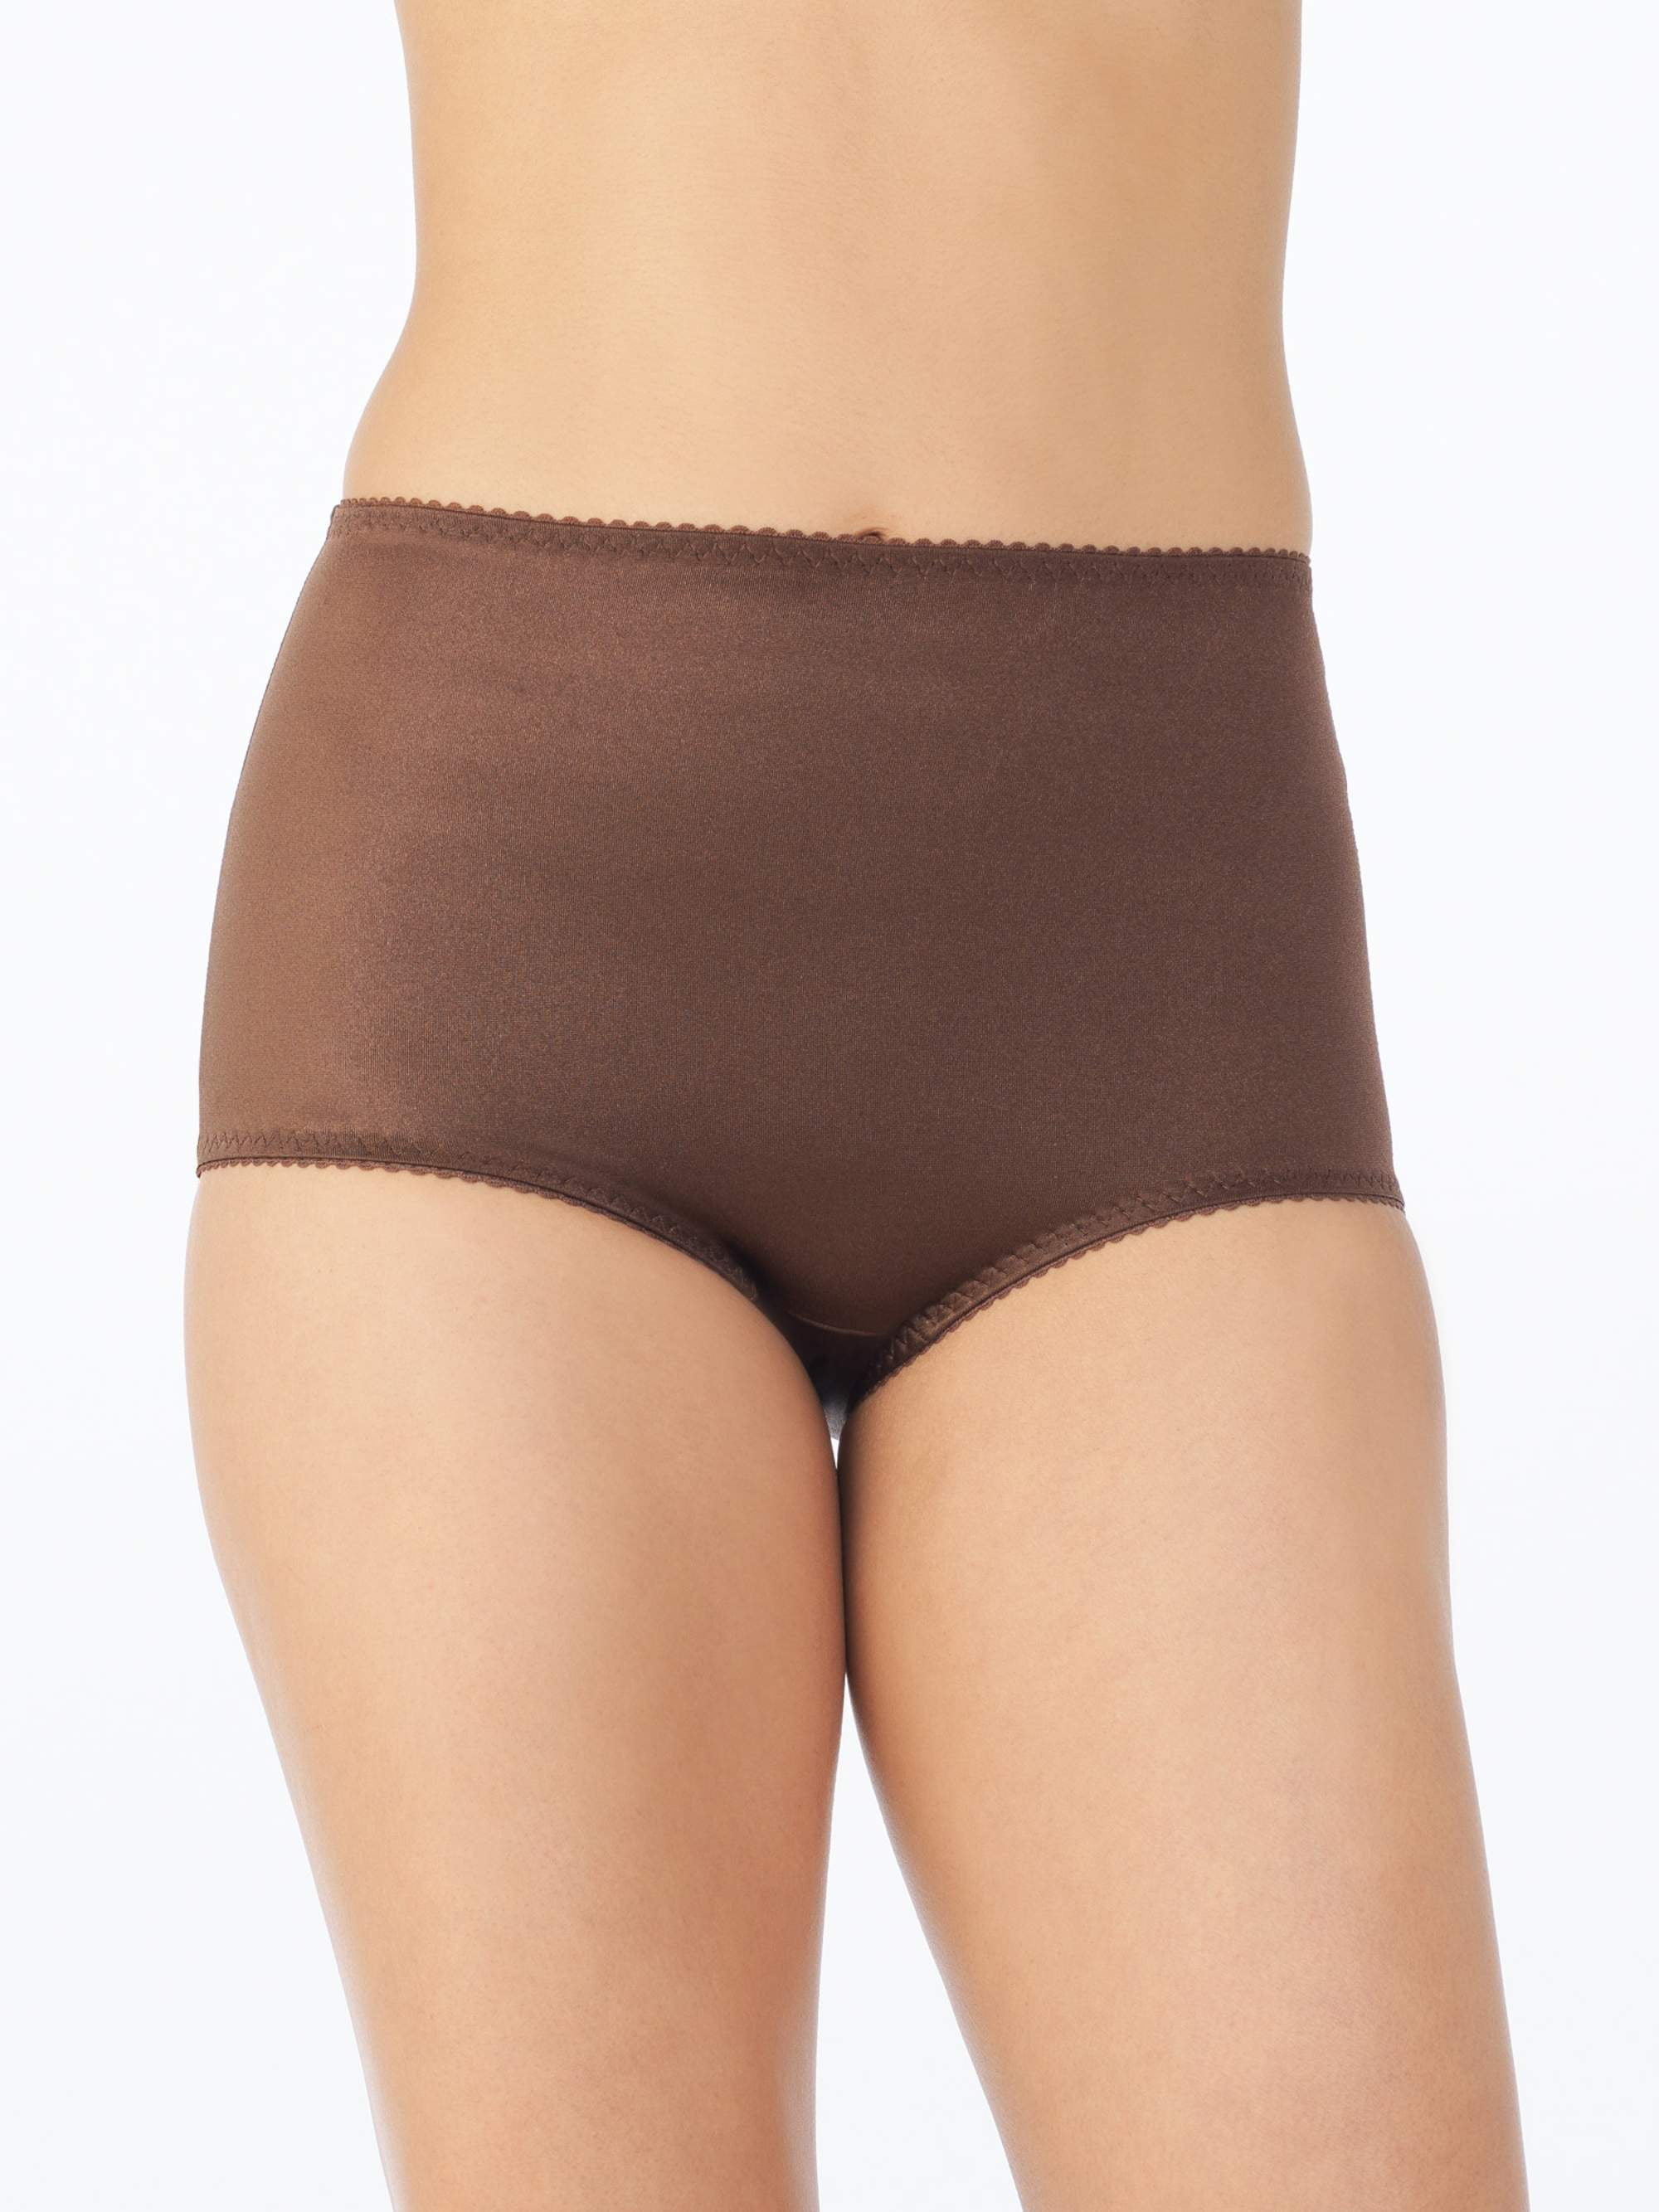 Women's Vassarette 40001 Undershapers Smoothing & Shaping Brief Panty  (Chocolate Kiss XL) 